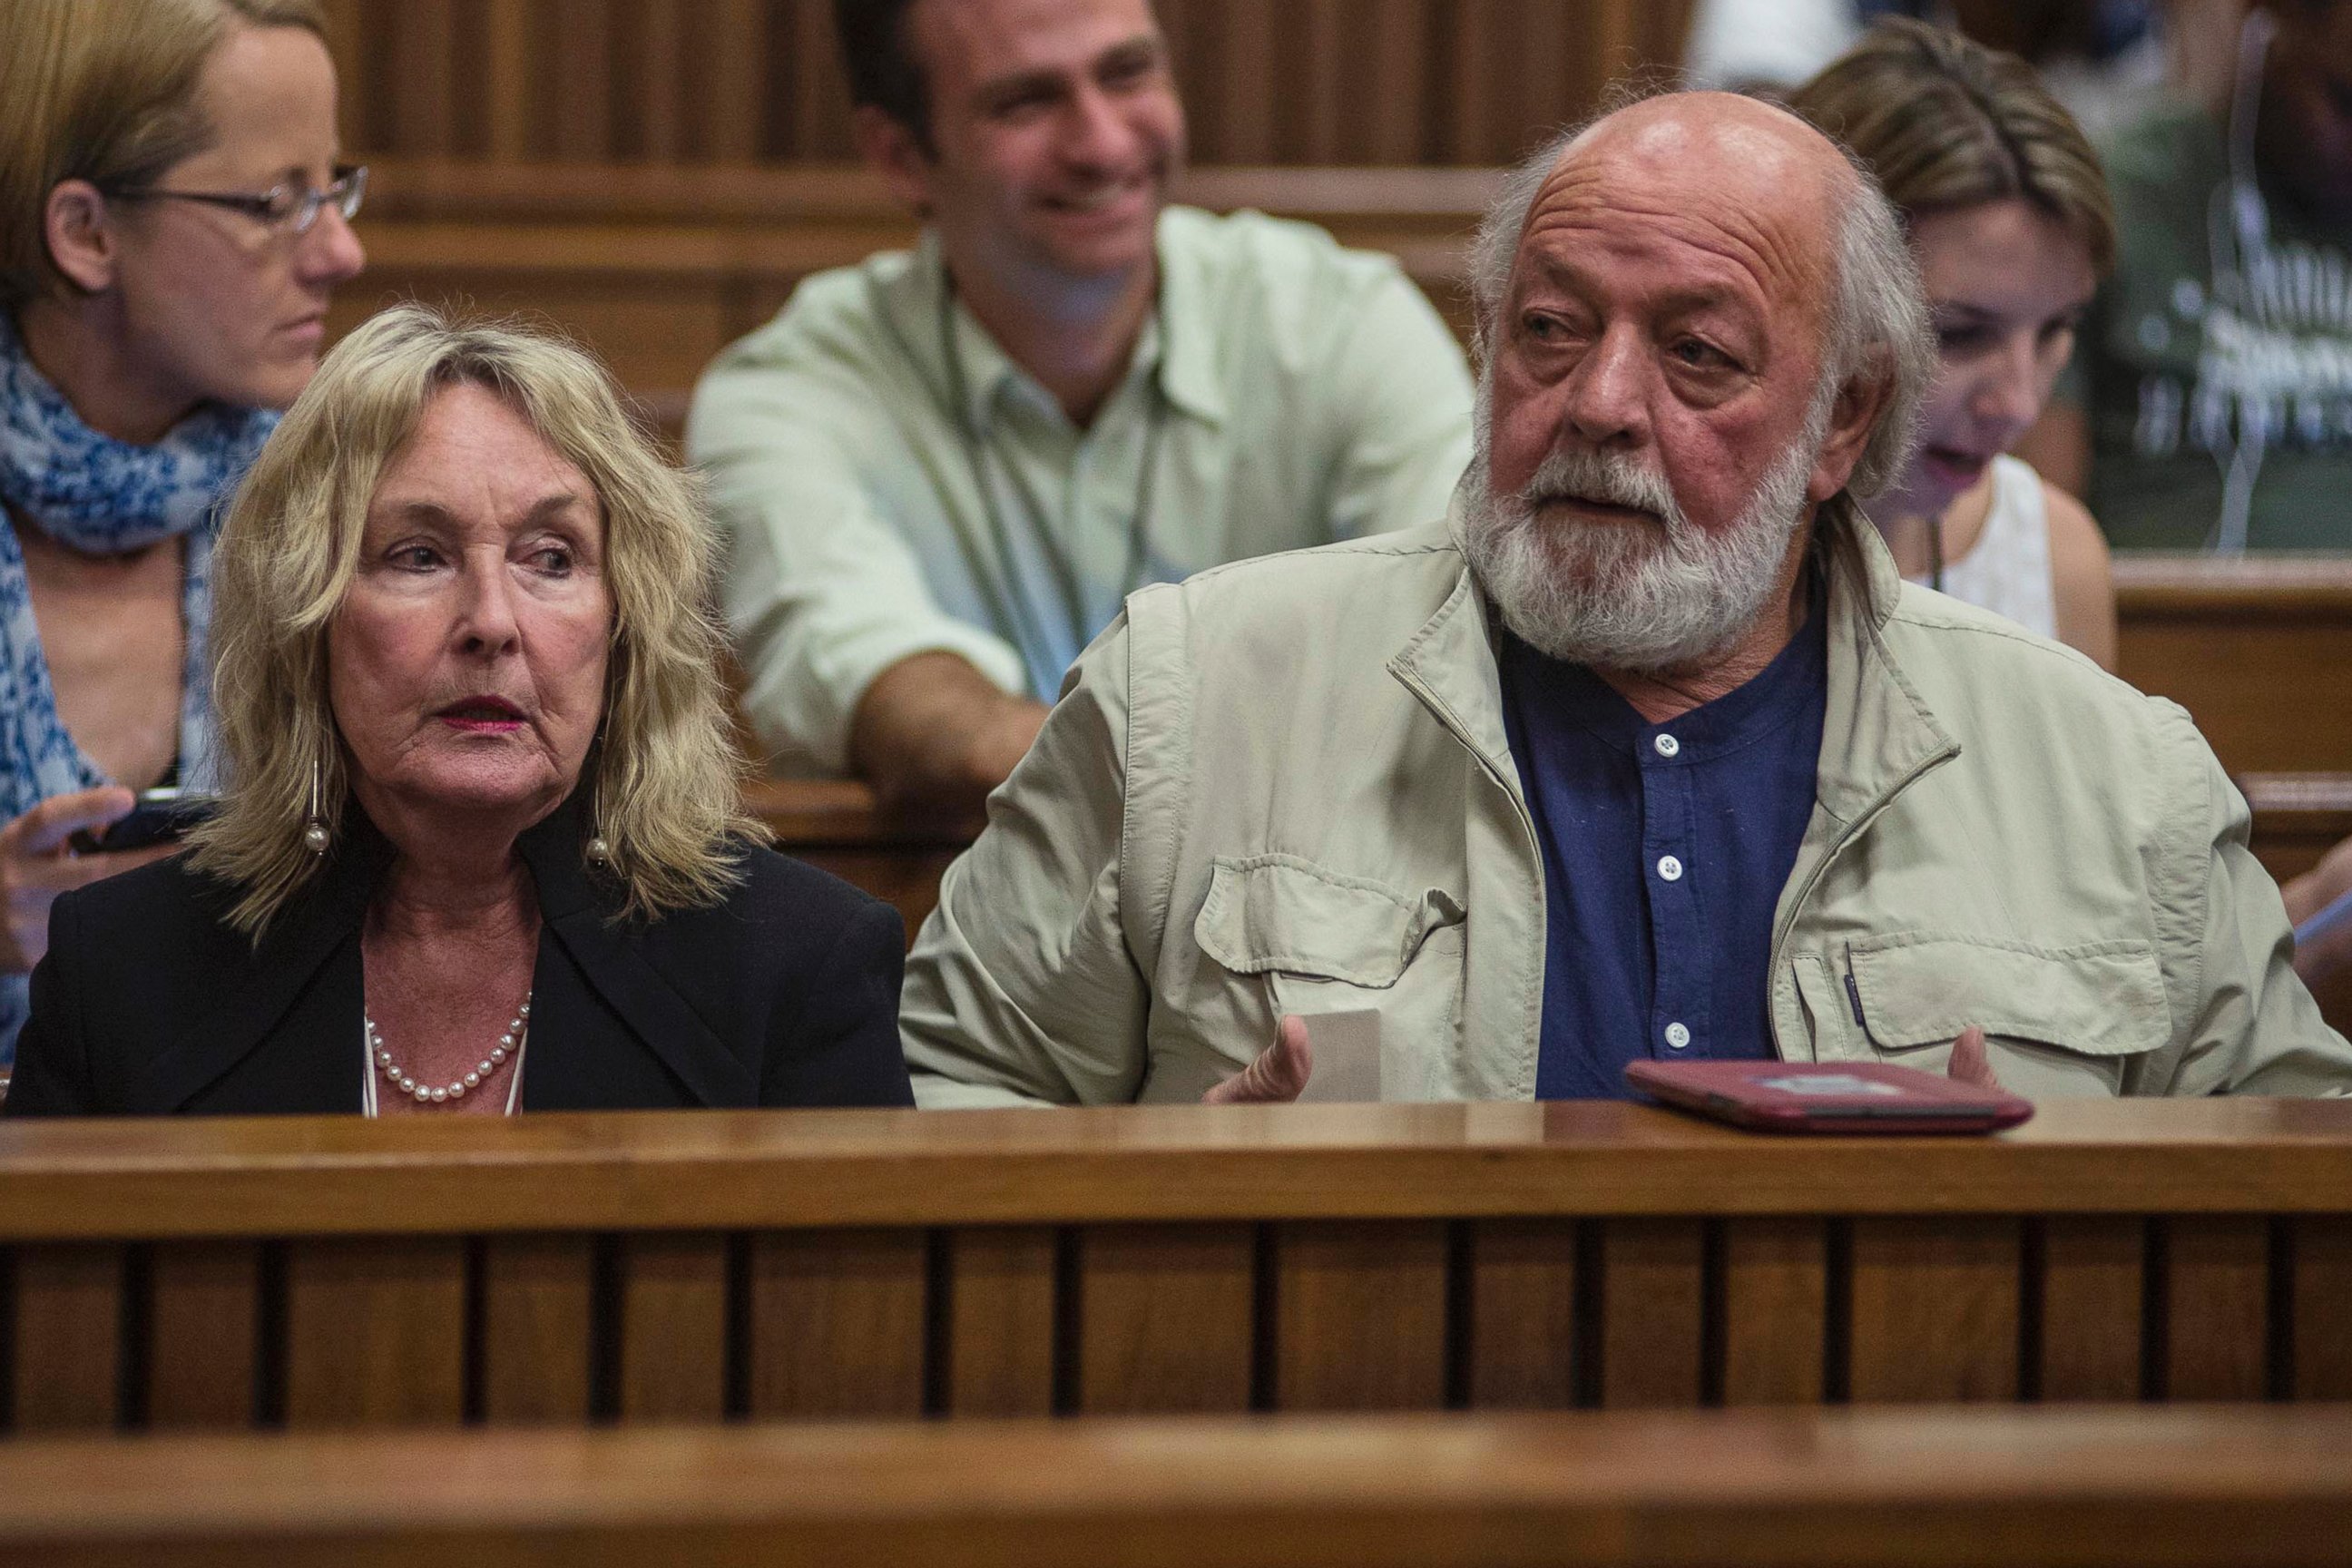 PHOTO: June and Barry Steenkamp, parents of the late Reeva Steenkamp, attend court on the third day of mitigation of sentencing for Oscar Pistorius at the high court in Pretoria, South Africa, Oct. 15, 2014.